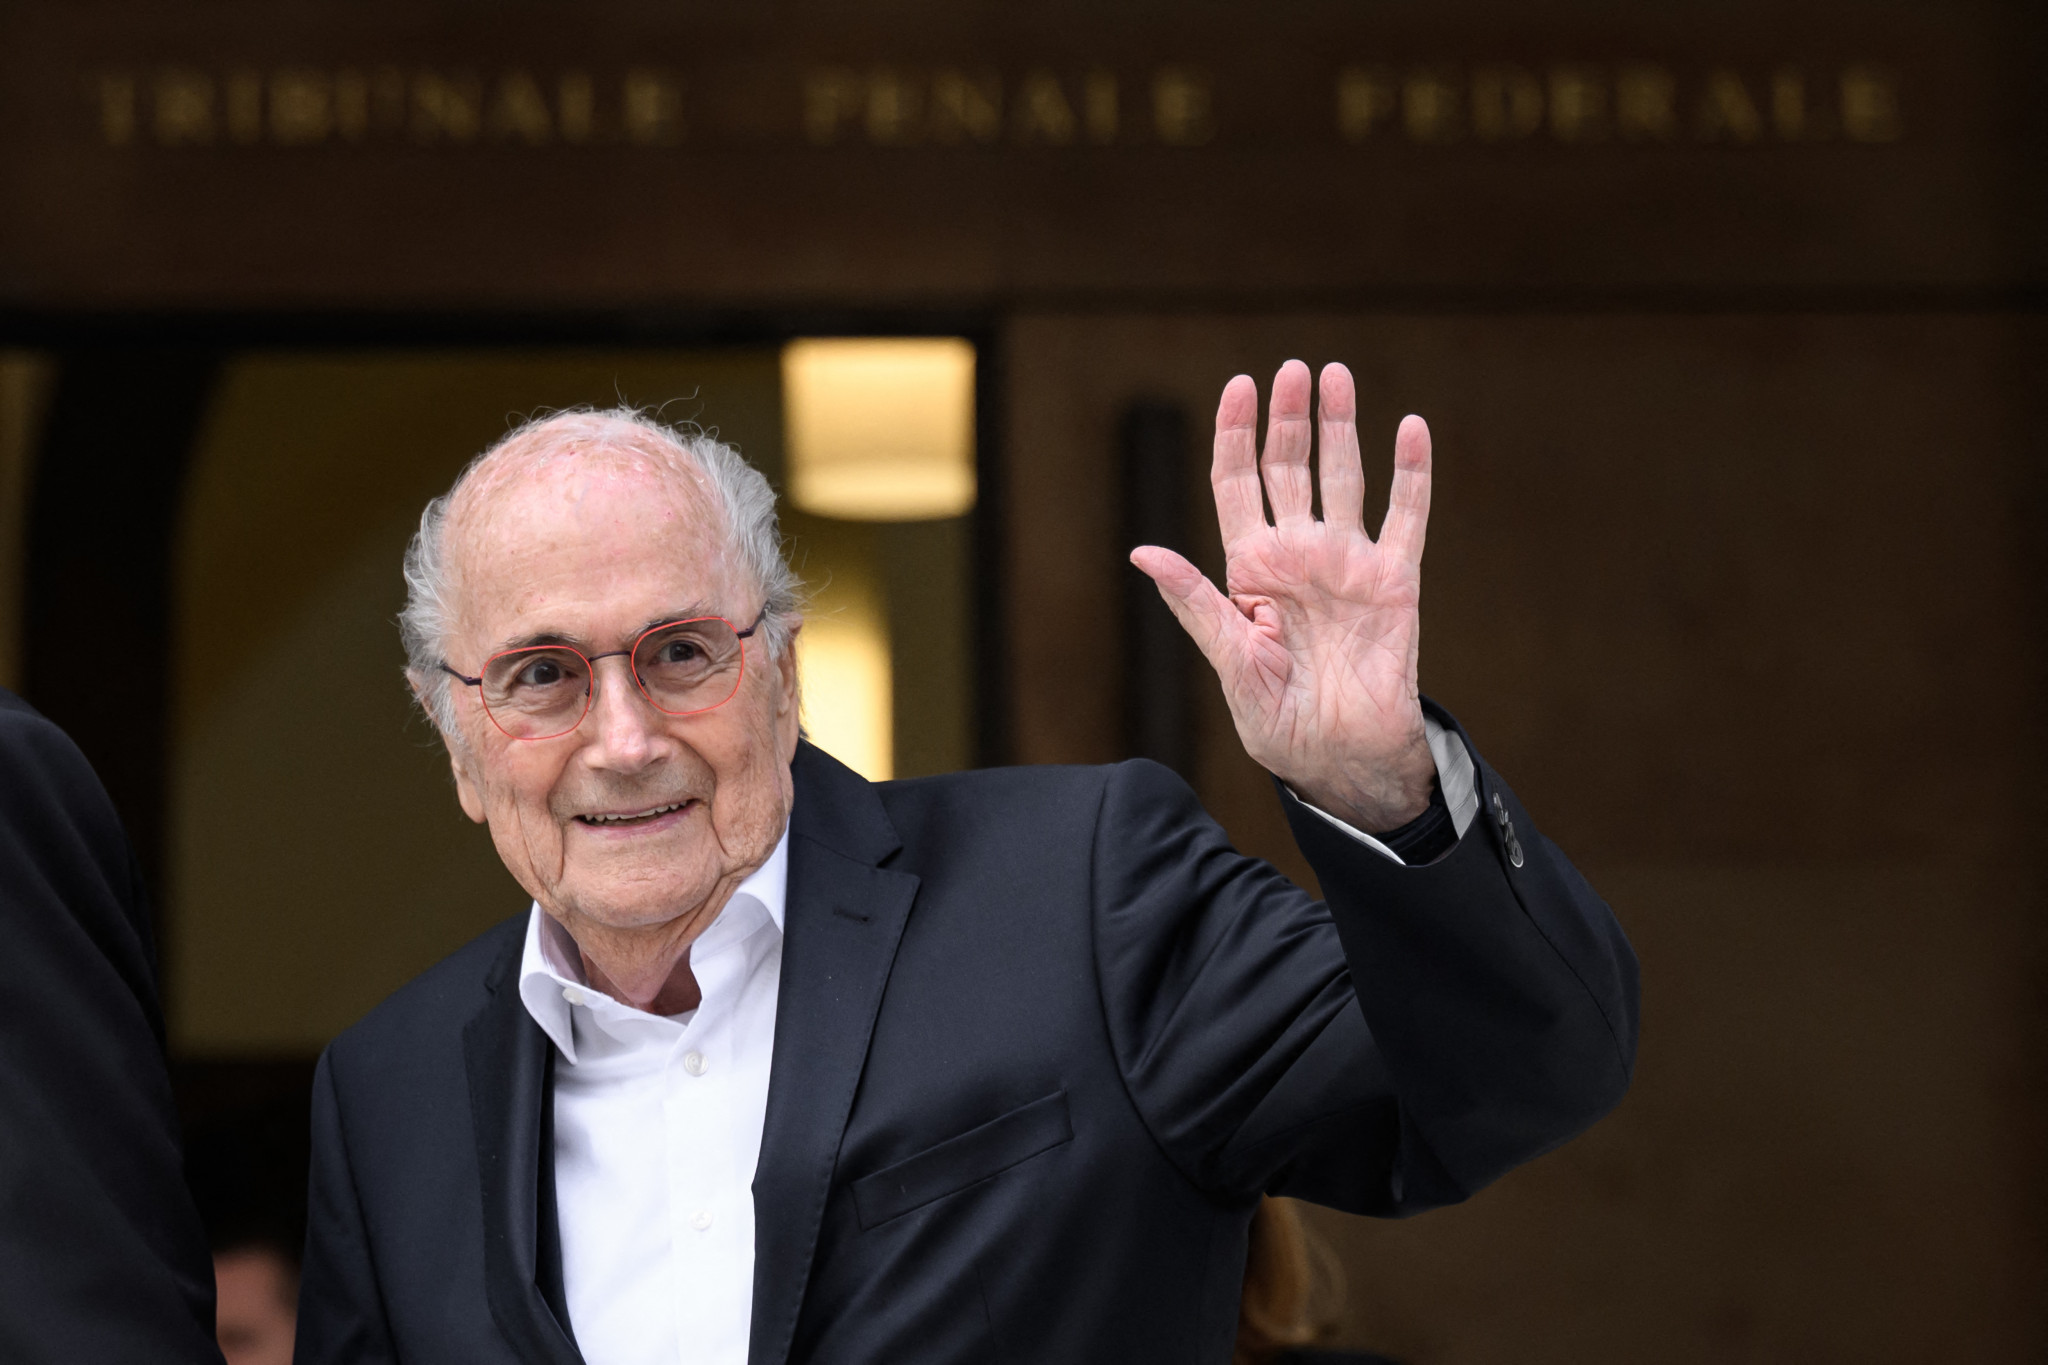 Sepp Blatter's testimony has been delayed on health grounds ©Getty Images